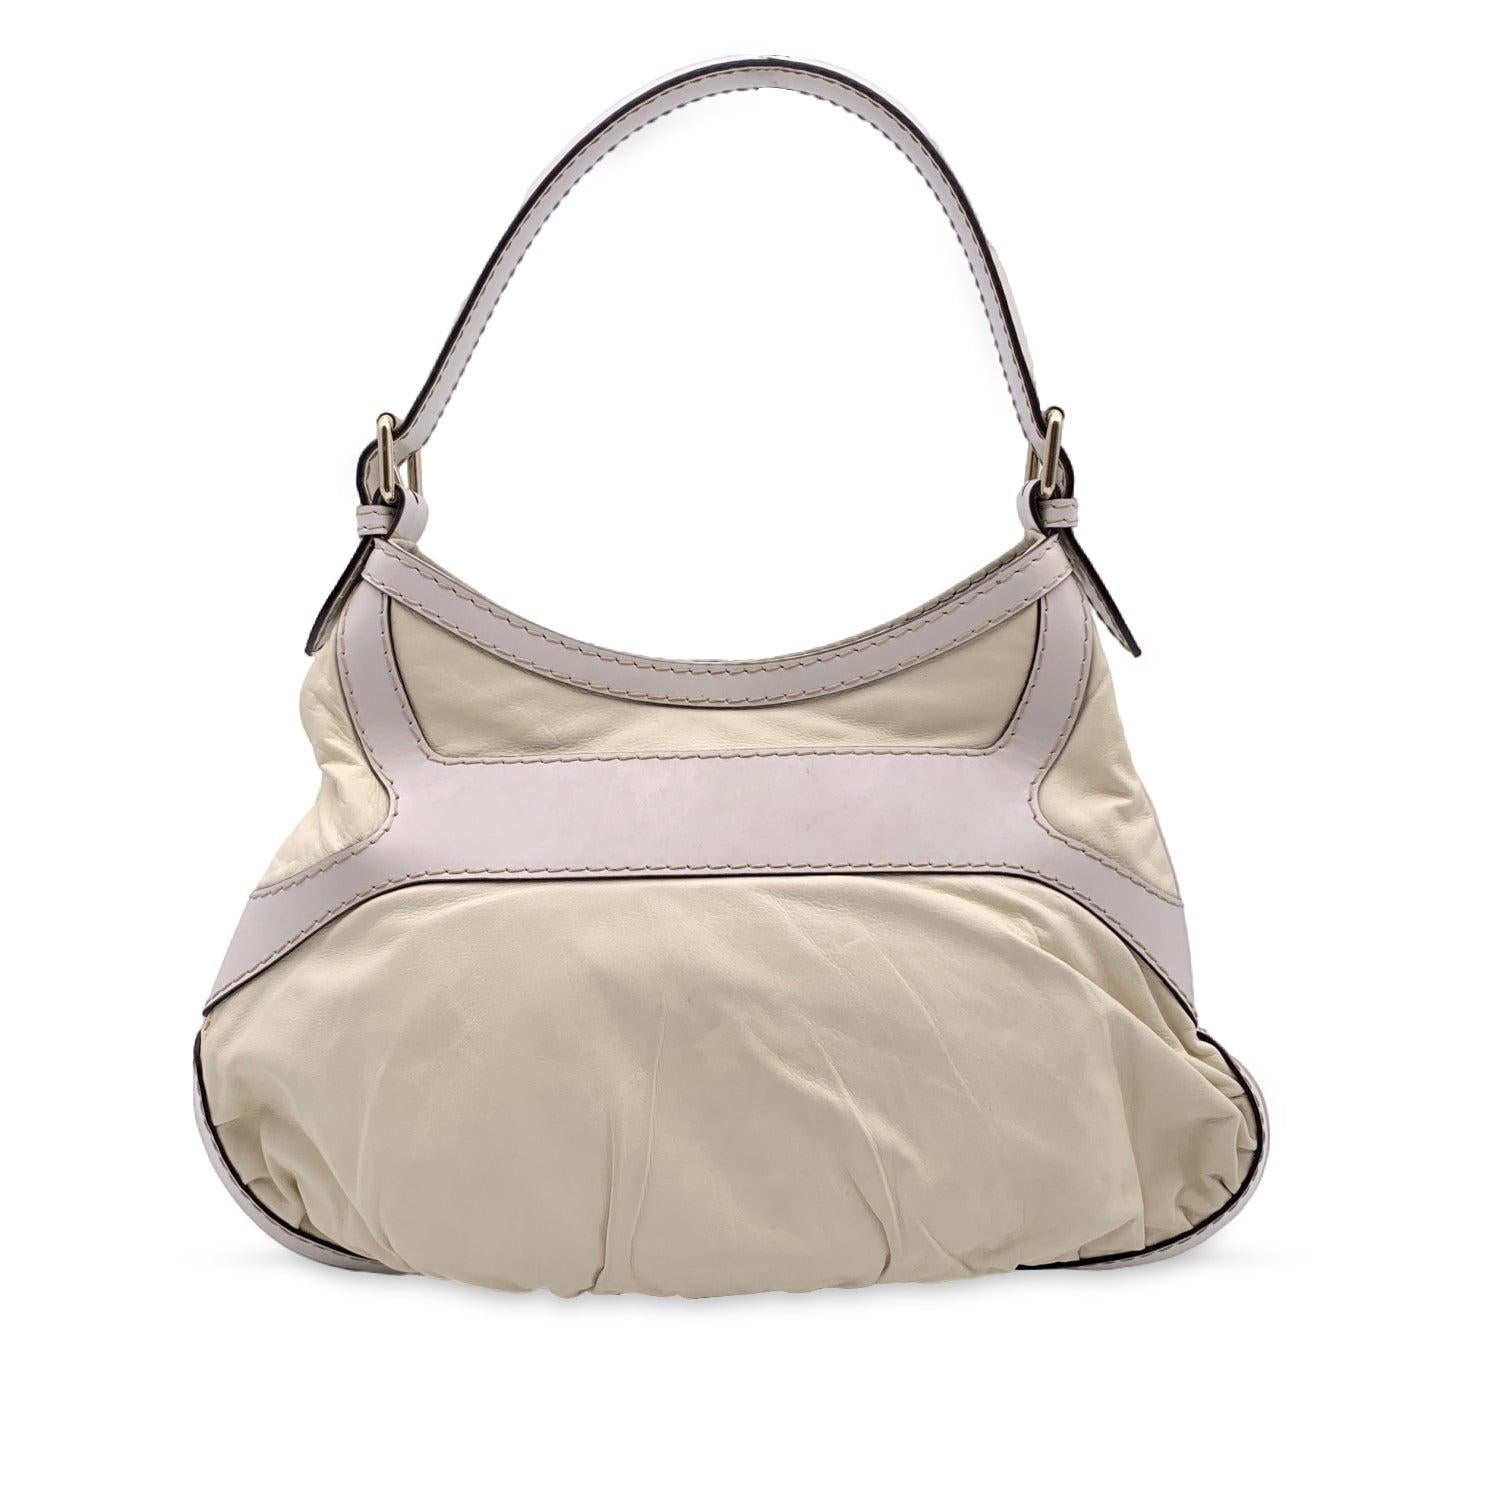 Gucci White Leather Queen Hobo Shoulder Bag In Good Condition For Sale In Rome, Rome